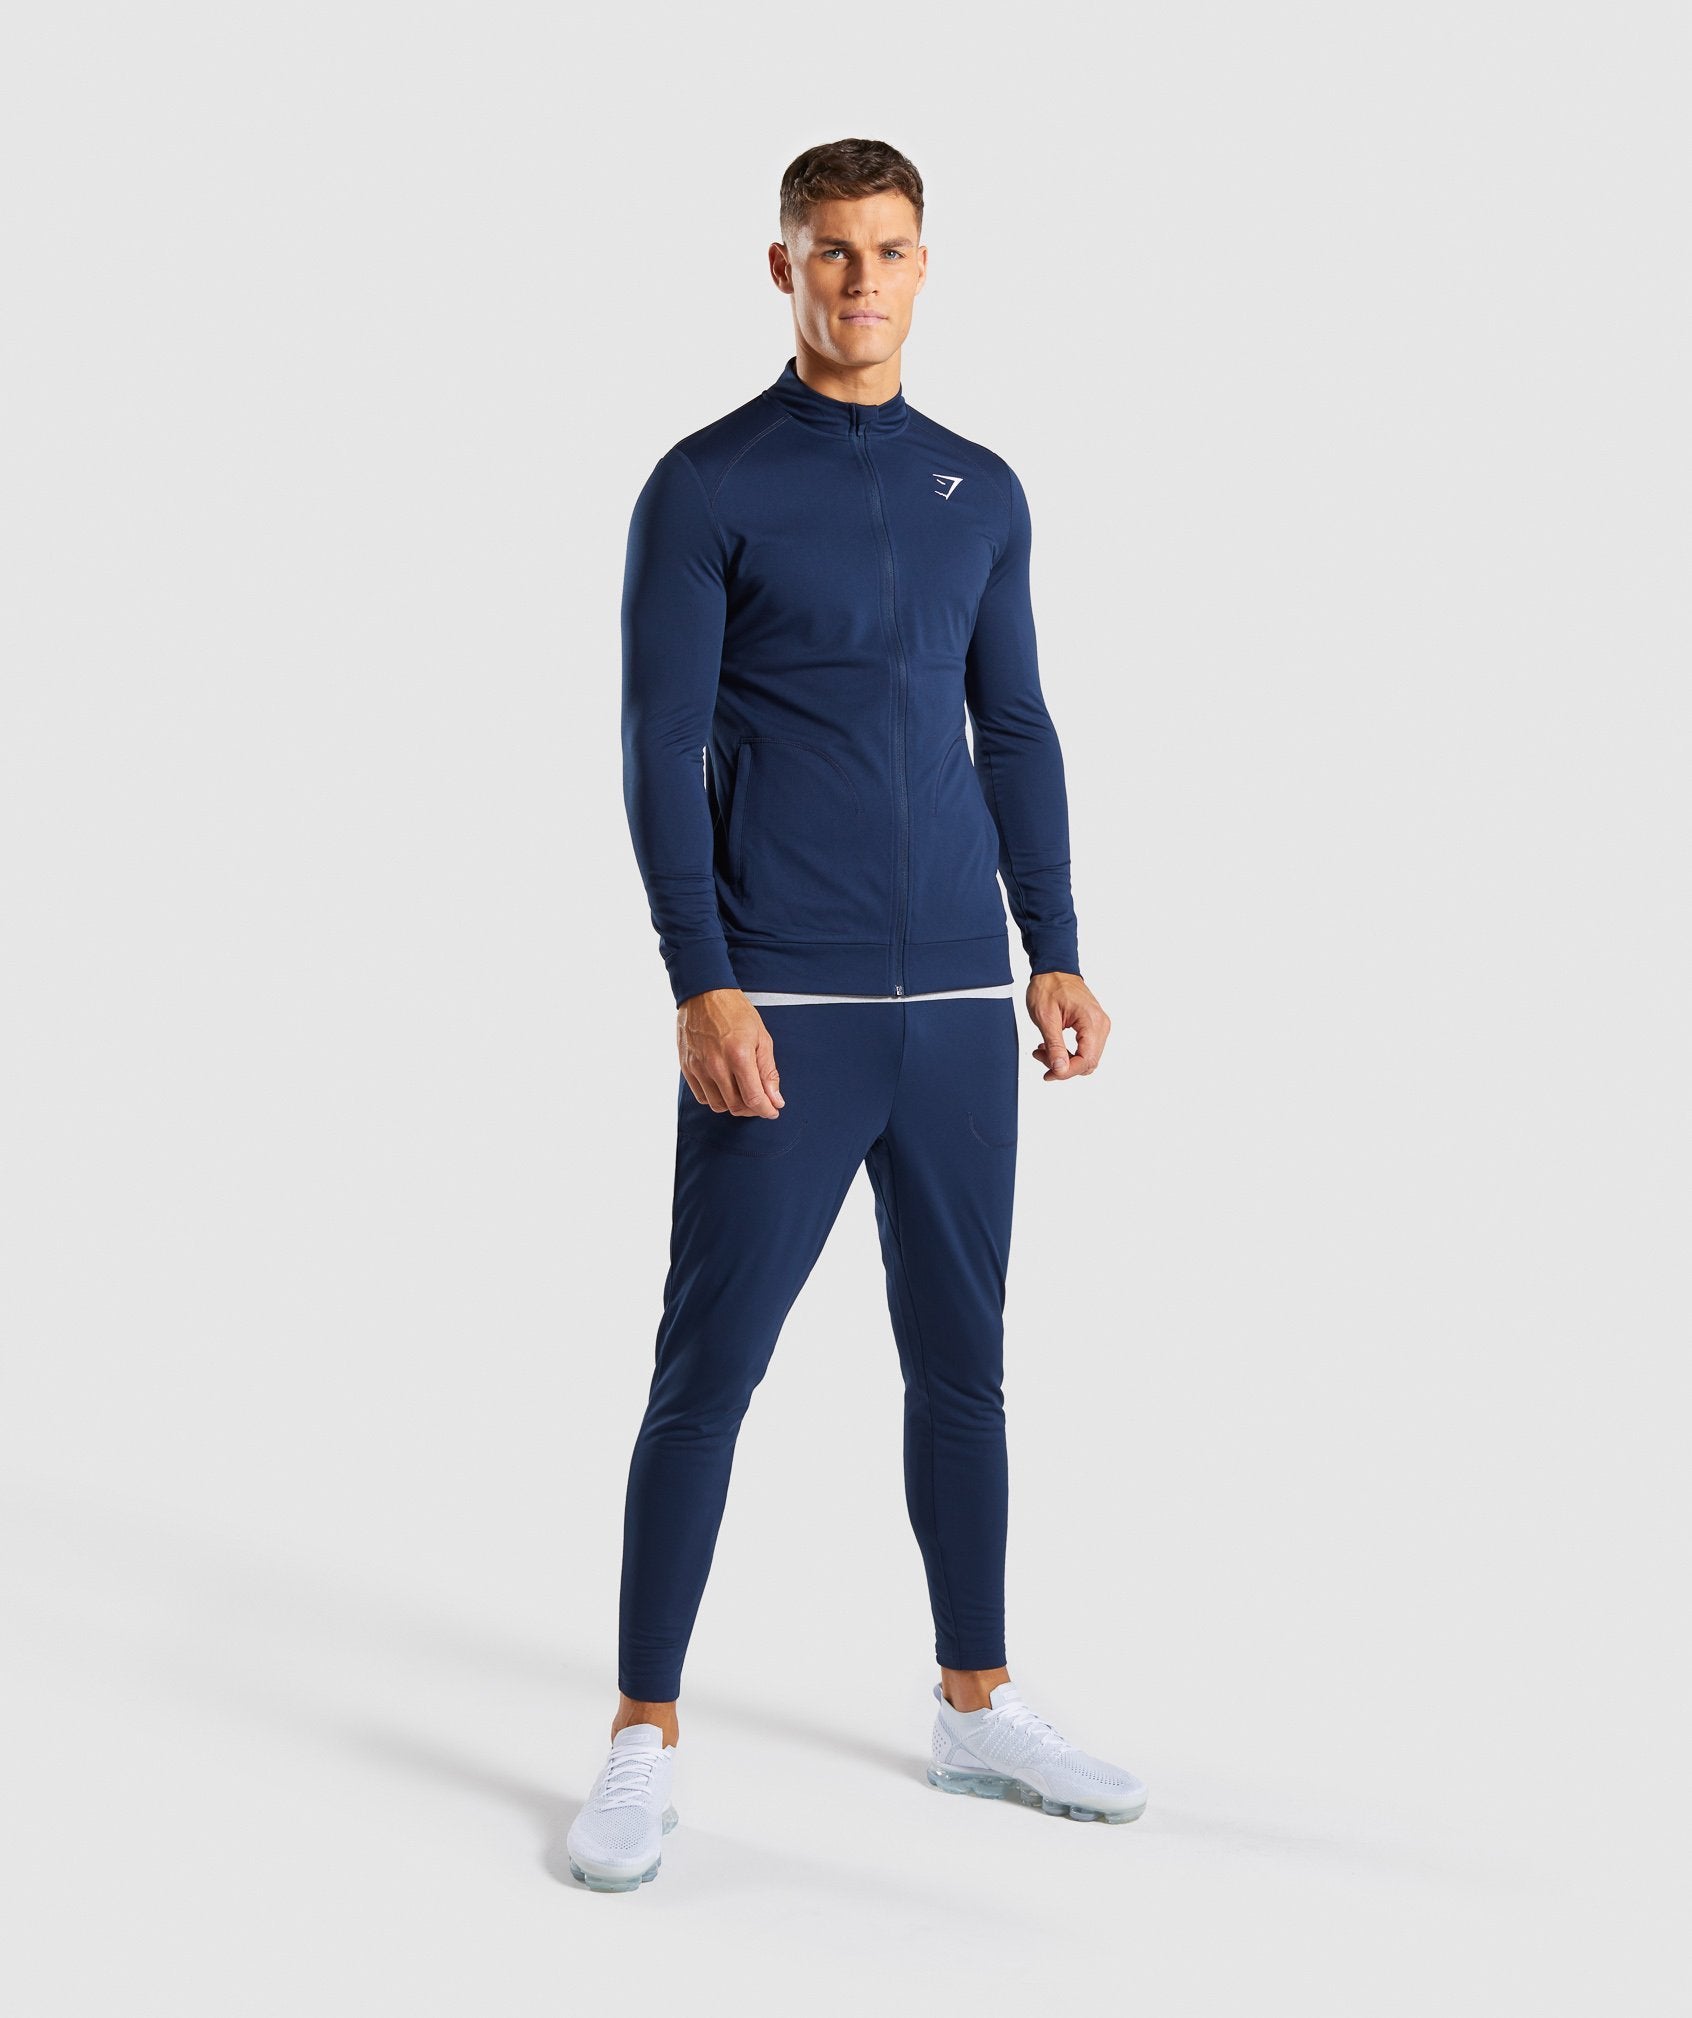 Flatlock Track Top in Sapphire Blue - view 4